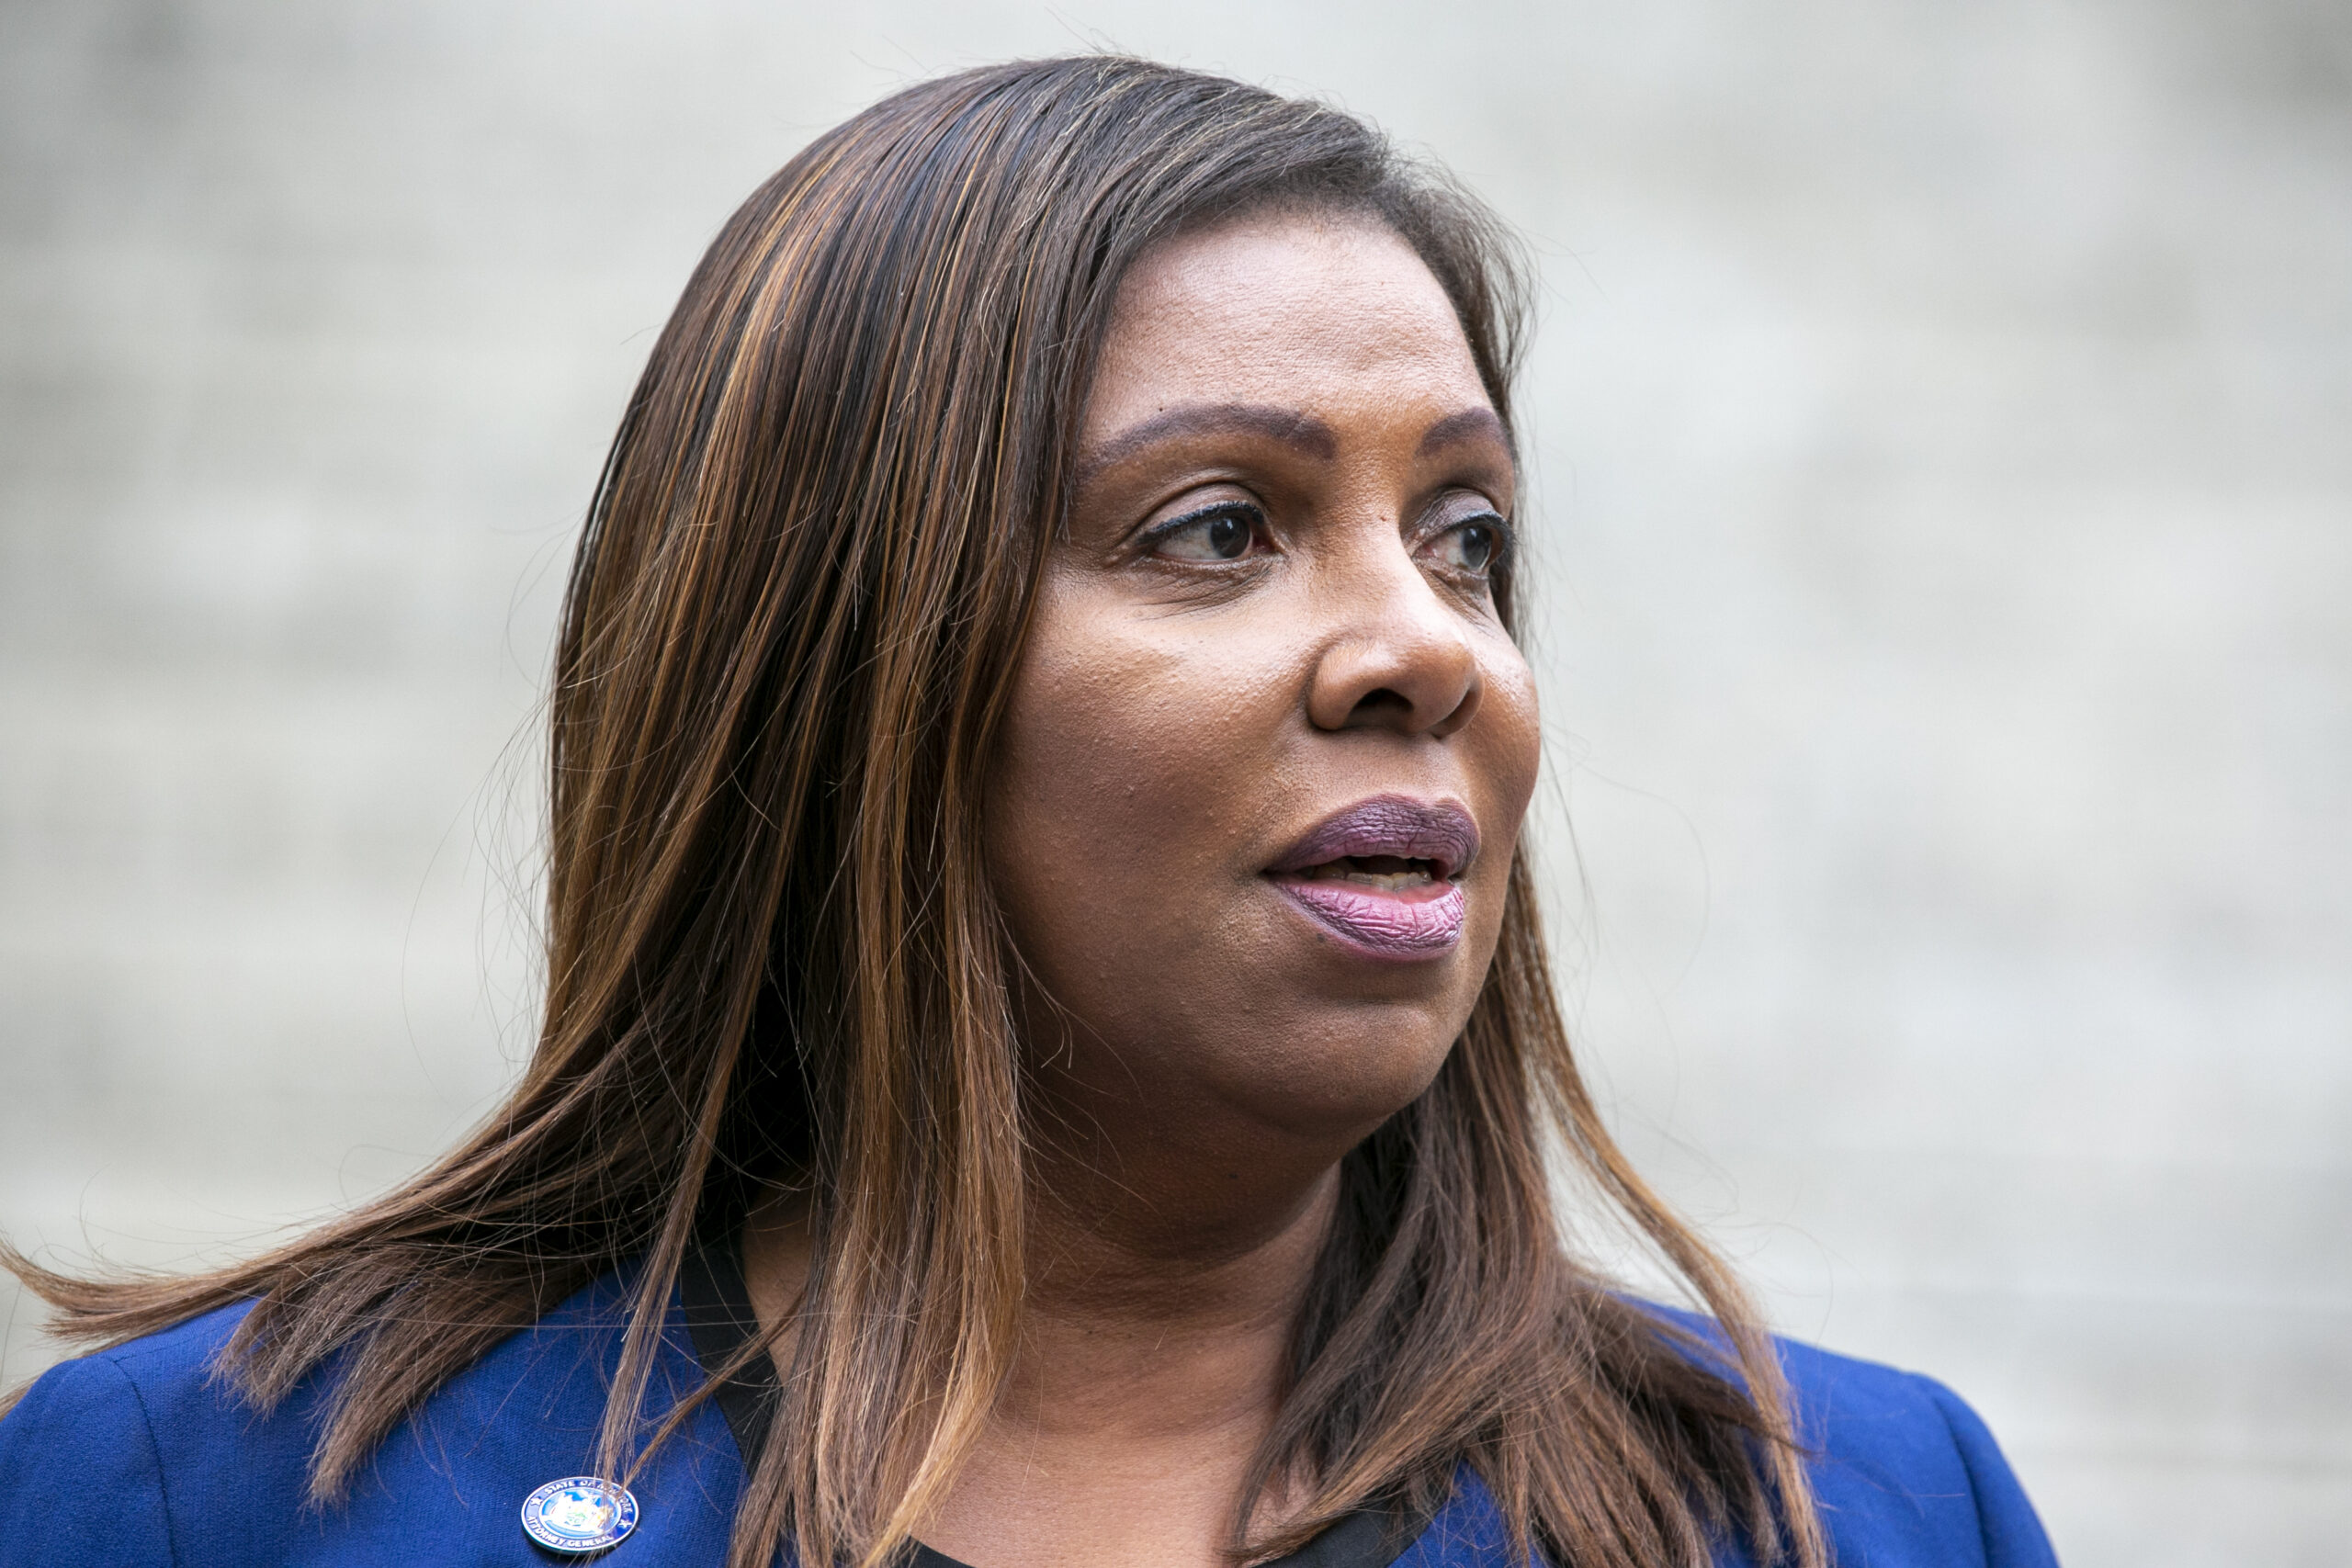 New York Attorney General Letitia James speaks in October outside the courthouse where former President Donald Trump's New York civil fraud trial was underway. The case was brought by James. Photo credit: Ted Shaffrey, The Associated Press